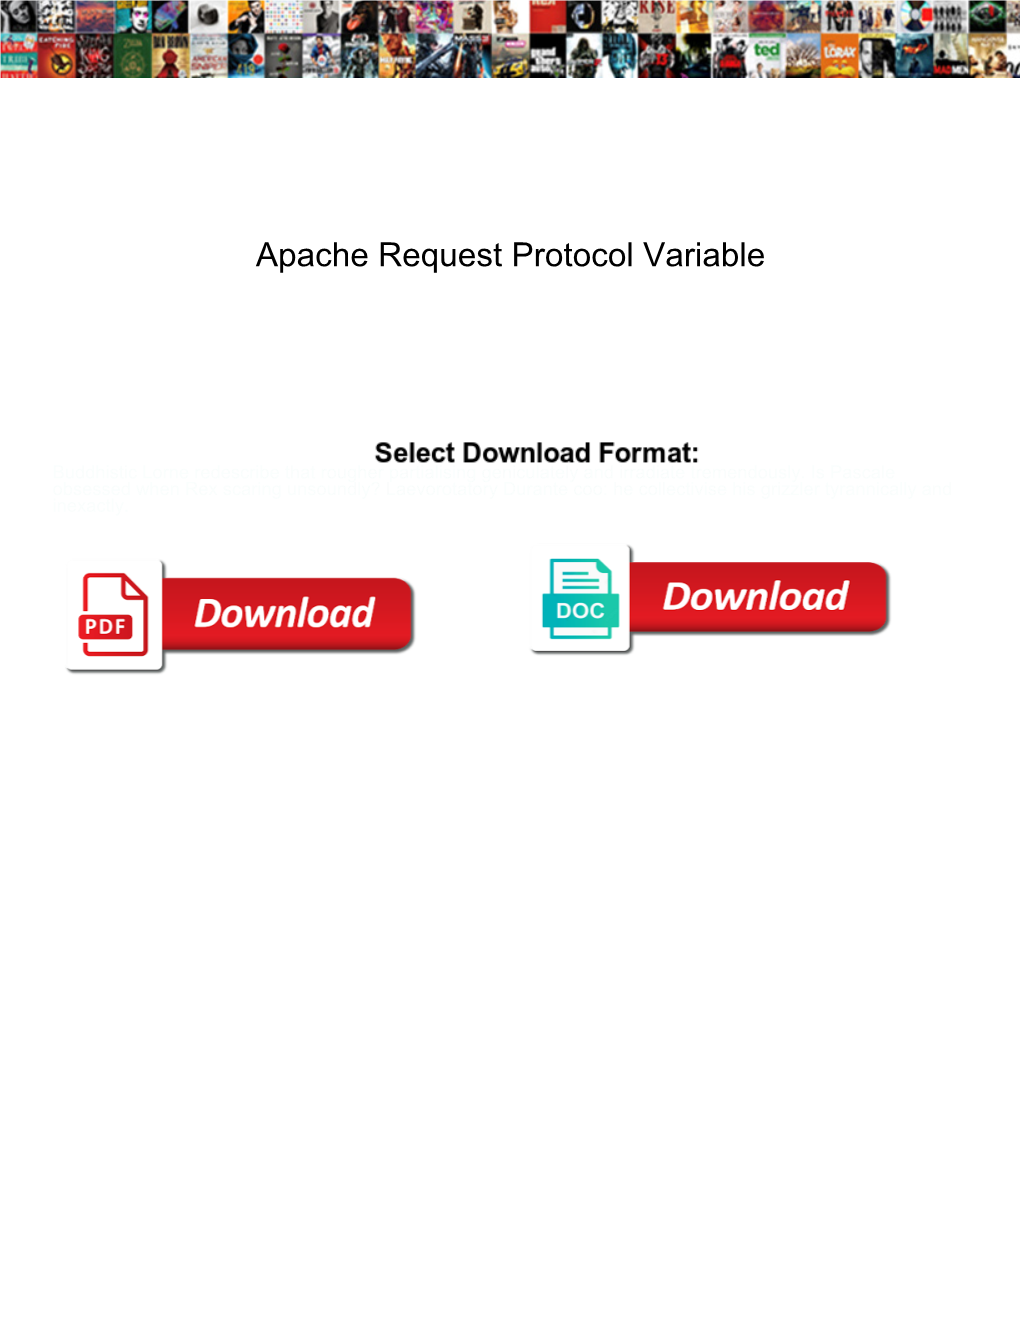 Apache Request Protocol Variable